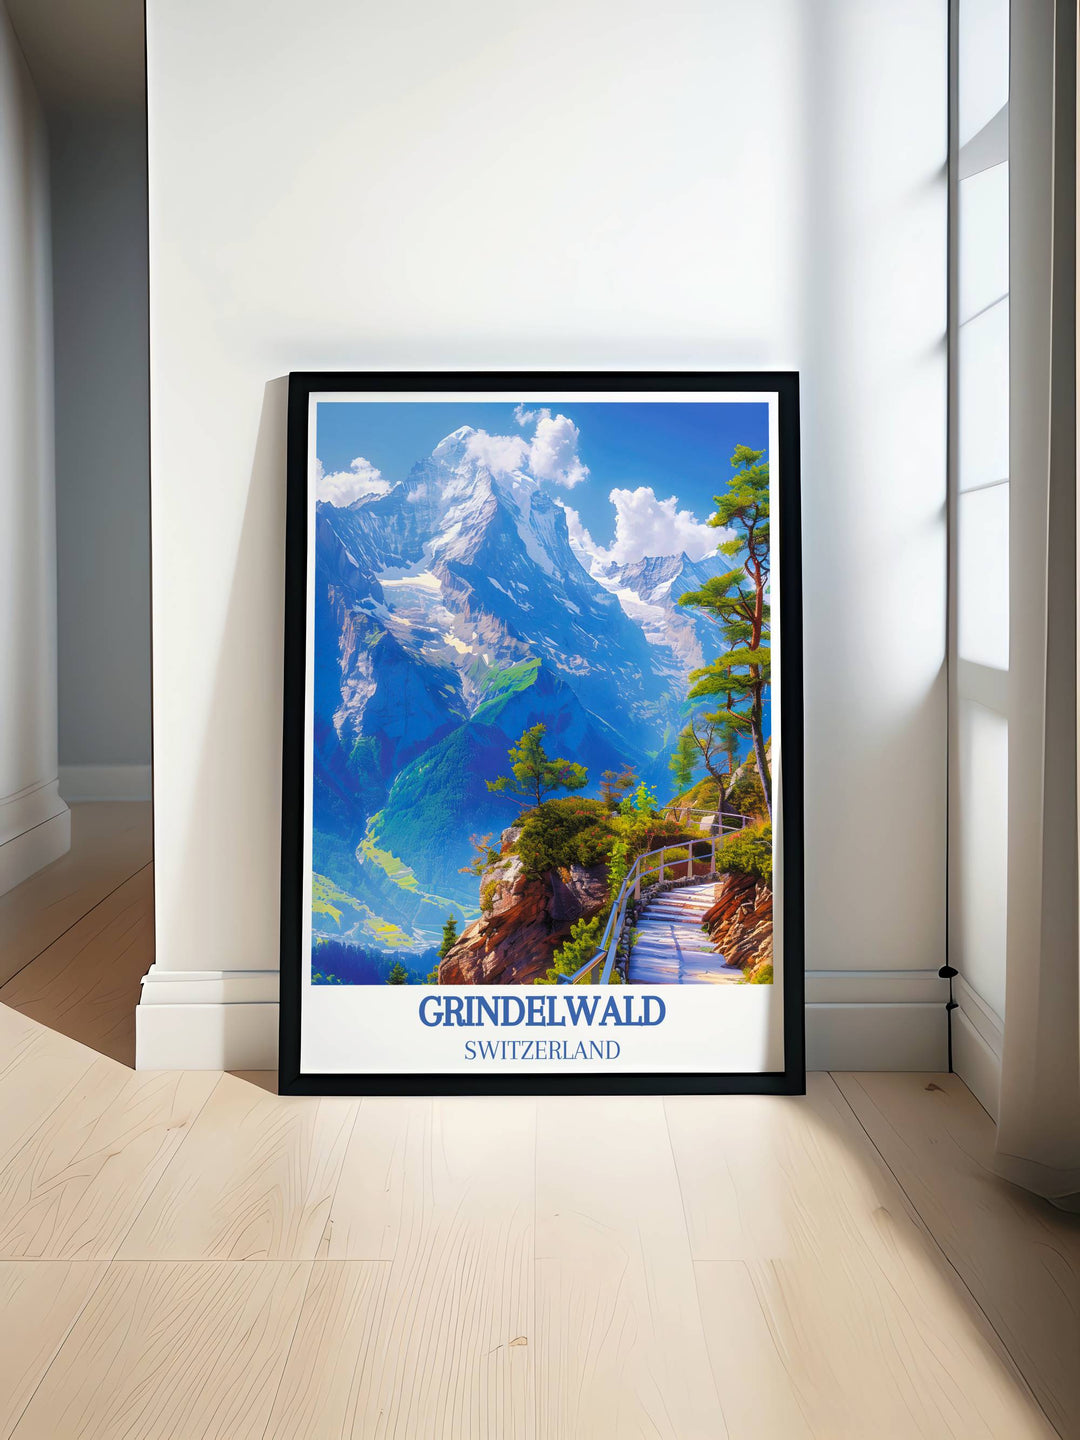 Eiger Mountain and Grindelwald village surrounded by lush greenery under clear skies, perfect for Swiss Alps print.